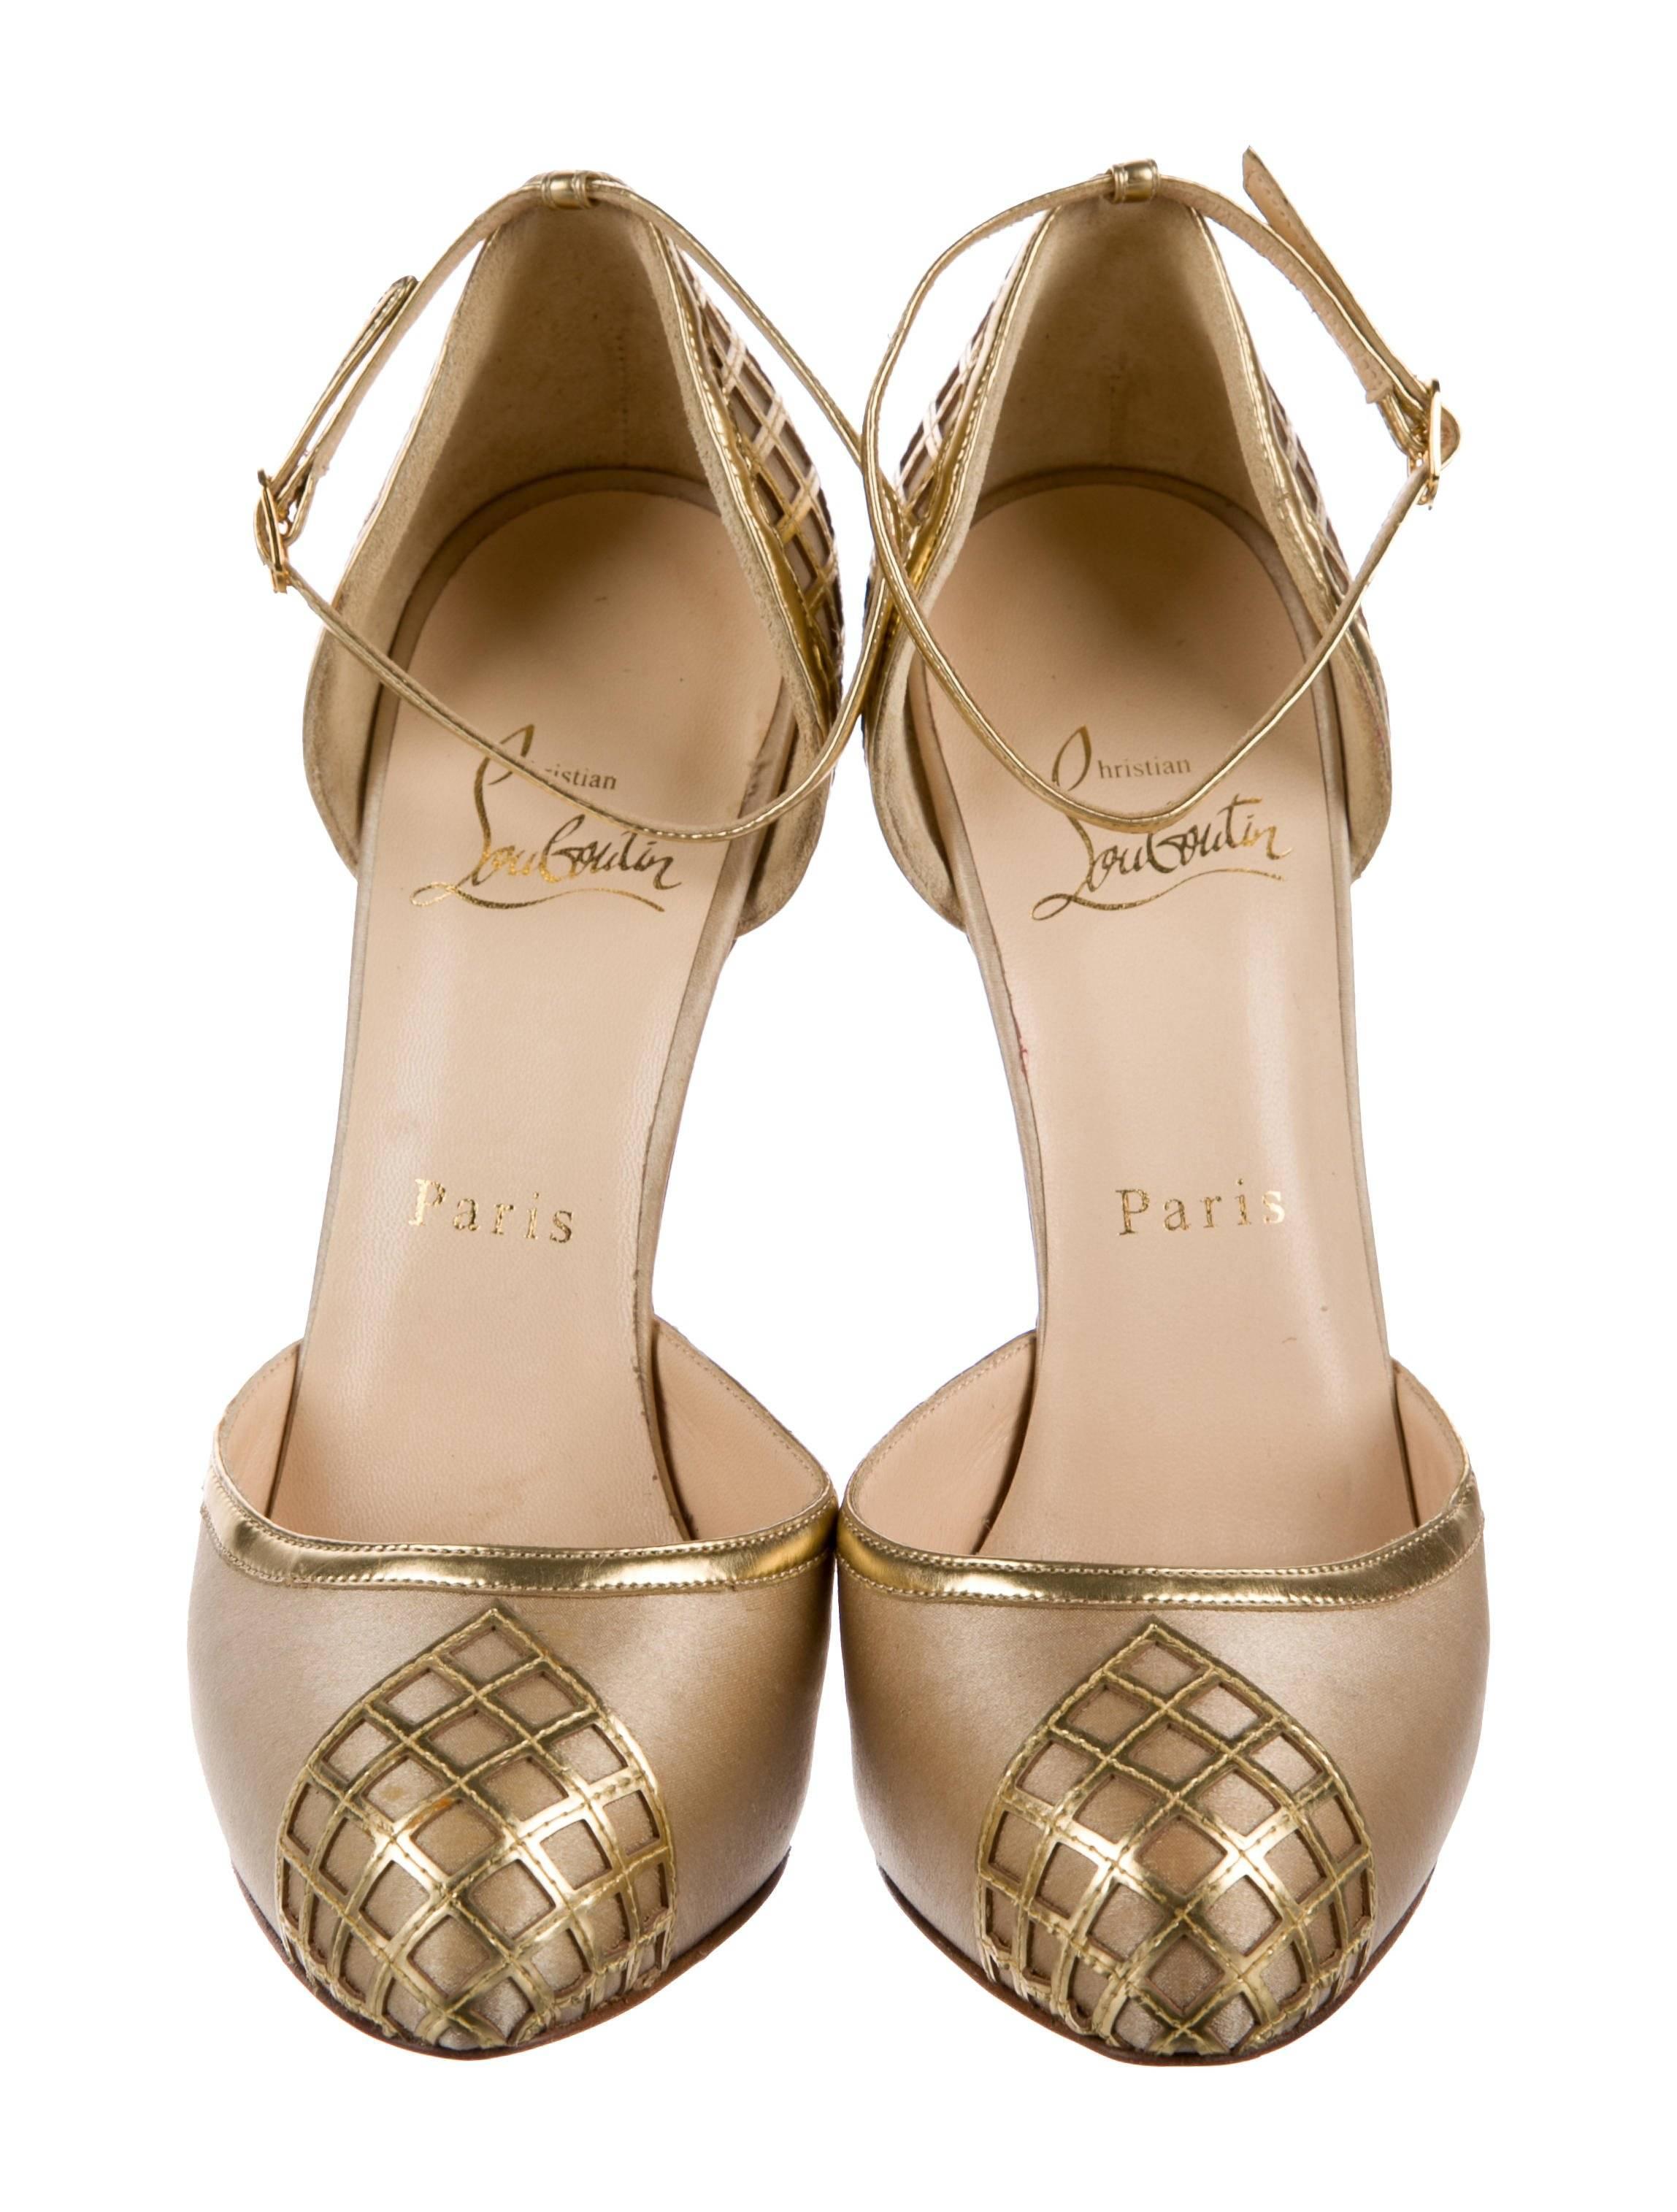 Christian Louboutin New Gold Textured Evening Sandal Pumps Heels in Box

Size IT 36
Satin
Leather 
Ankle buckle closure
Made in Italy
Heel height 5"